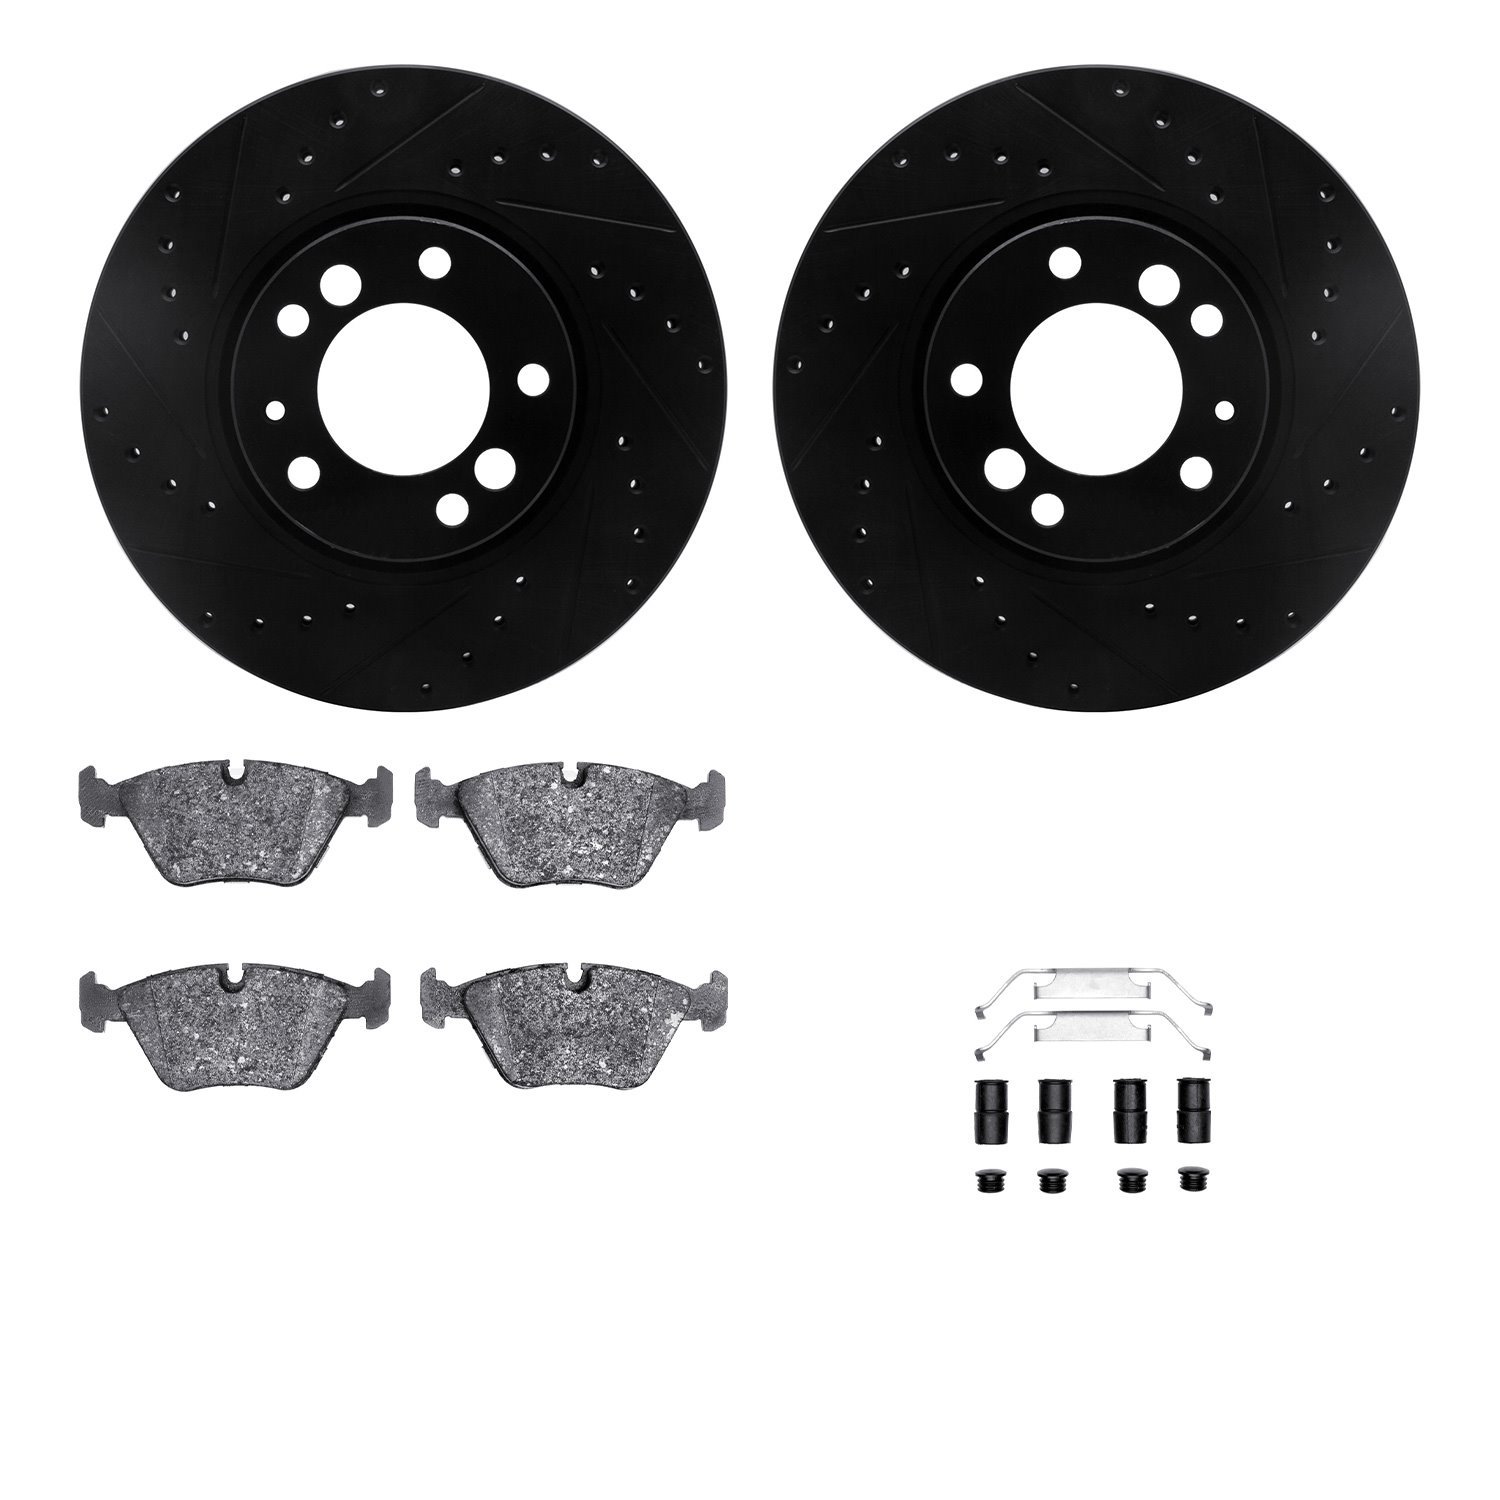 8312-31022 Drilled/Slotted Brake Rotors with 3000-Series Ceramic Brake Pads Kit & Hardware [Black], 1991-1993 BMW, Position: Fro